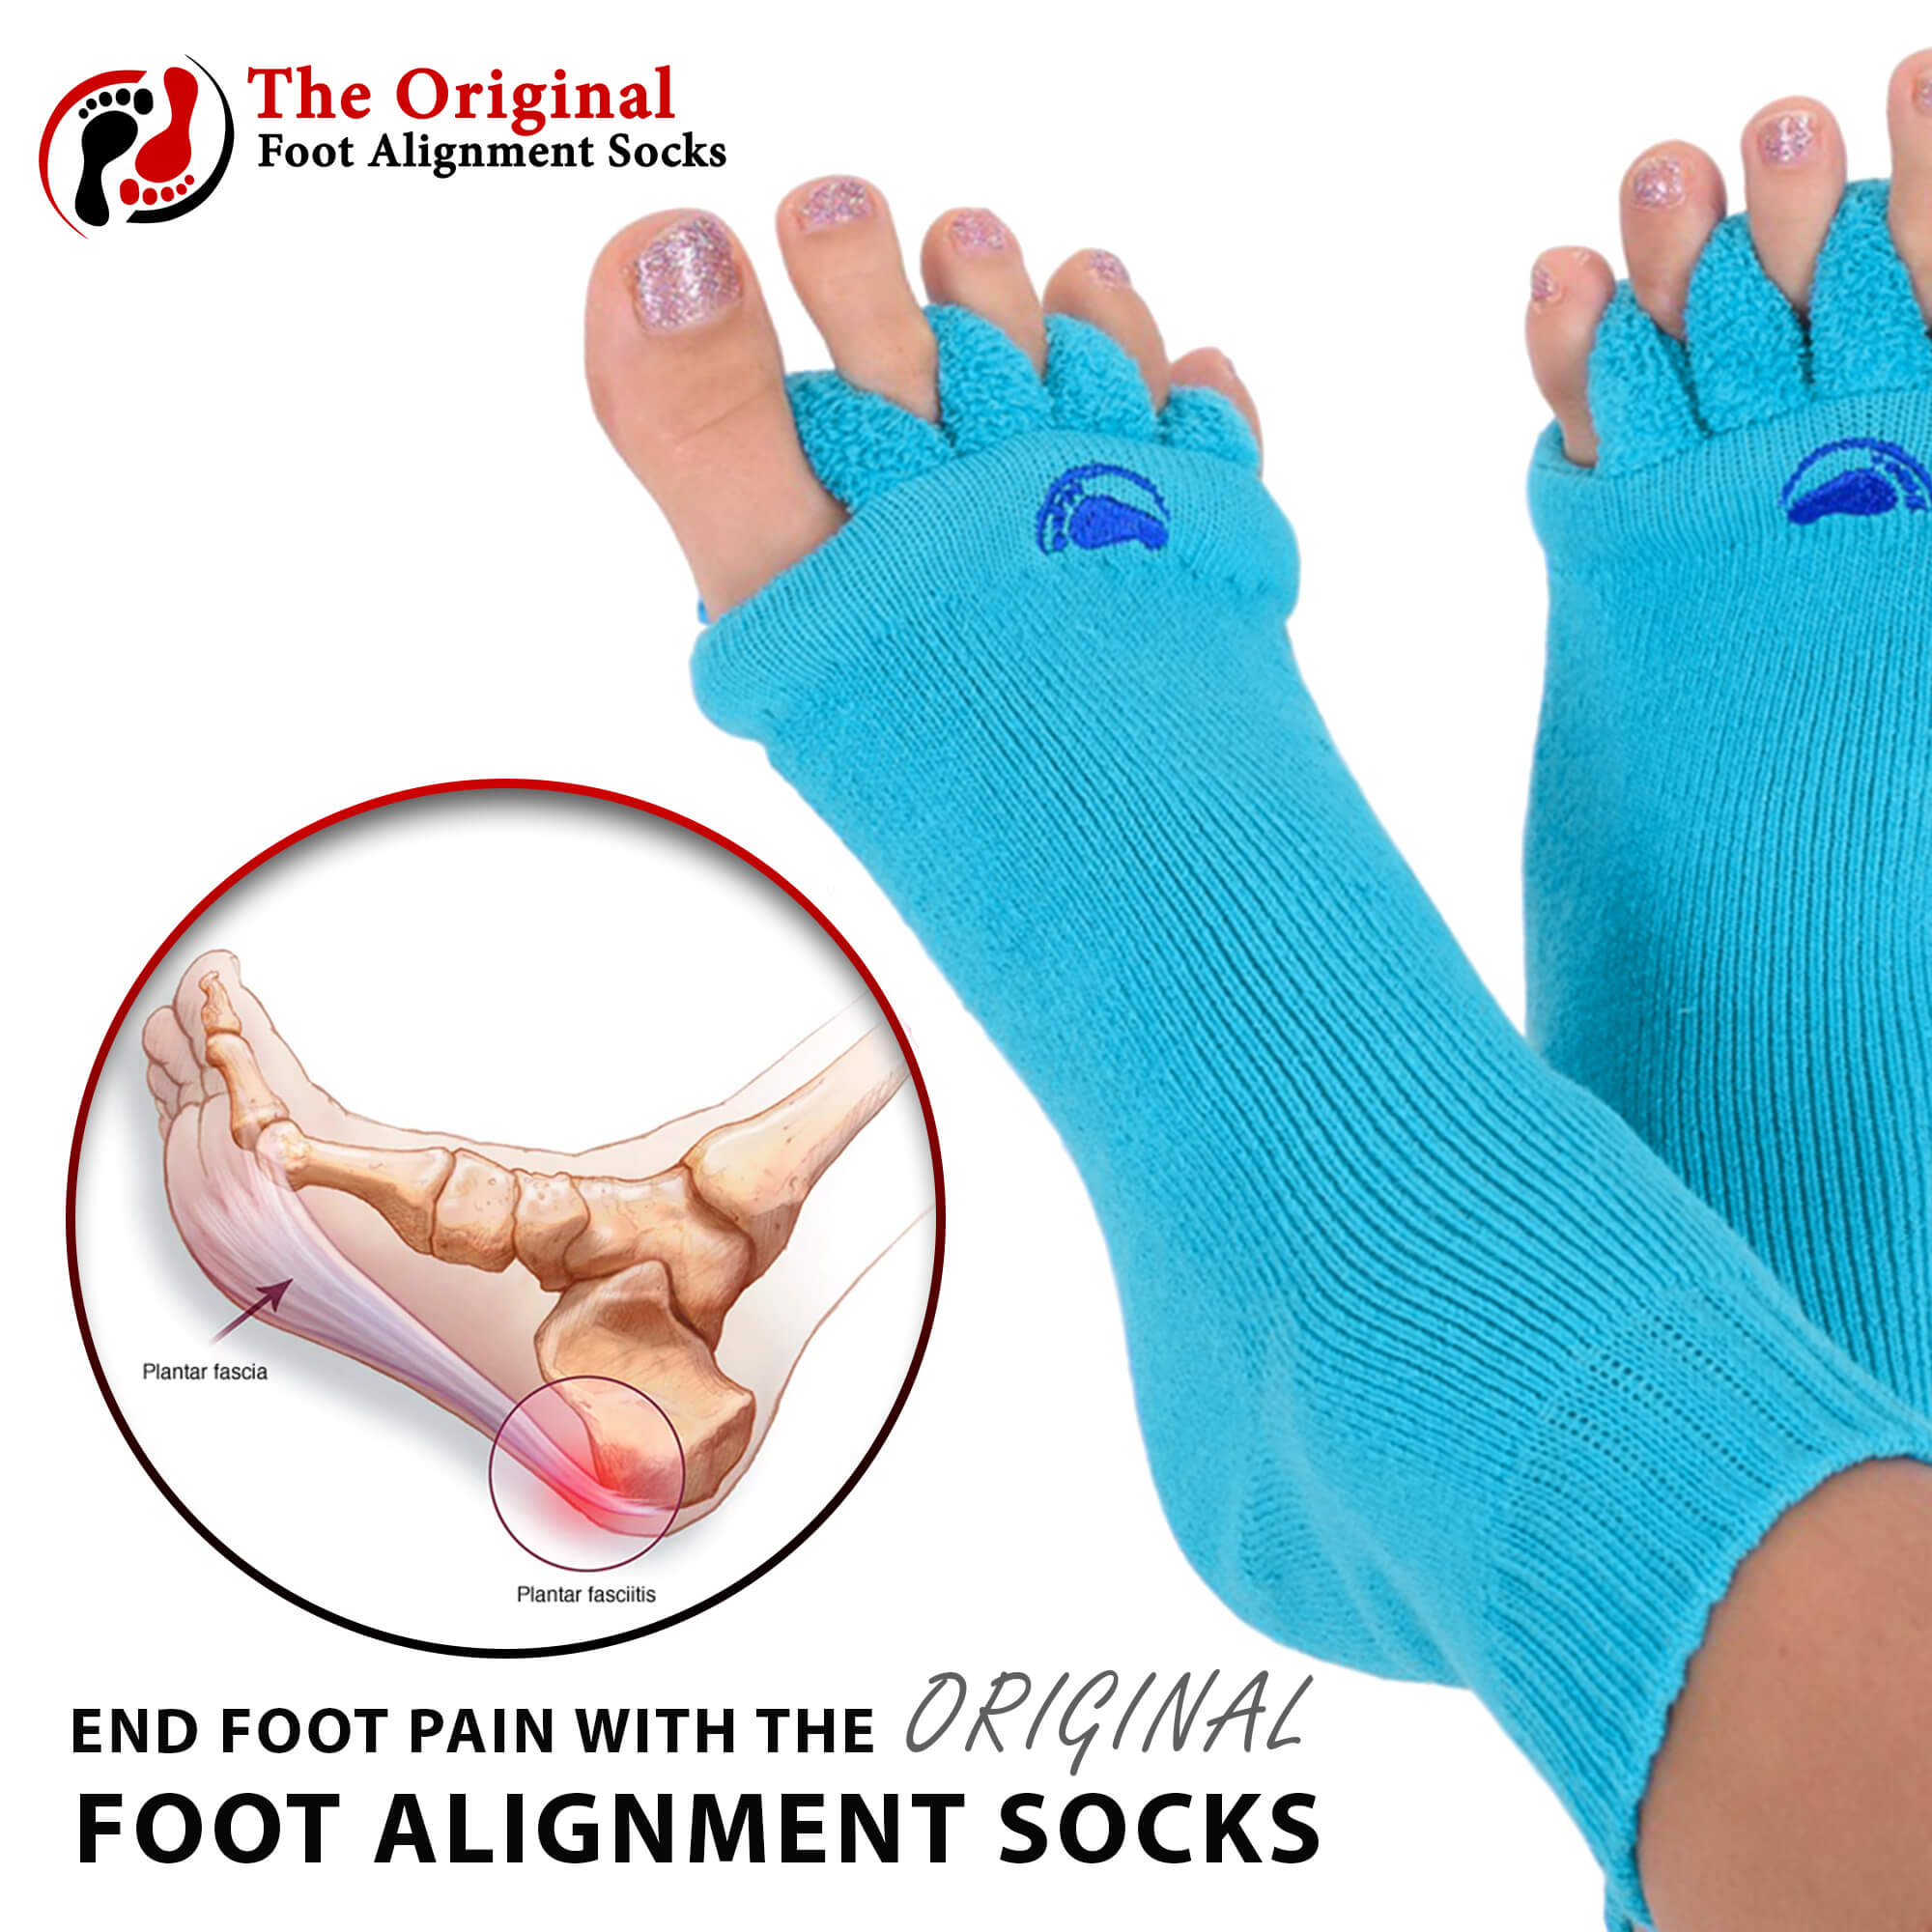 Why Quality Socks Help Your Feet Stay Healthy